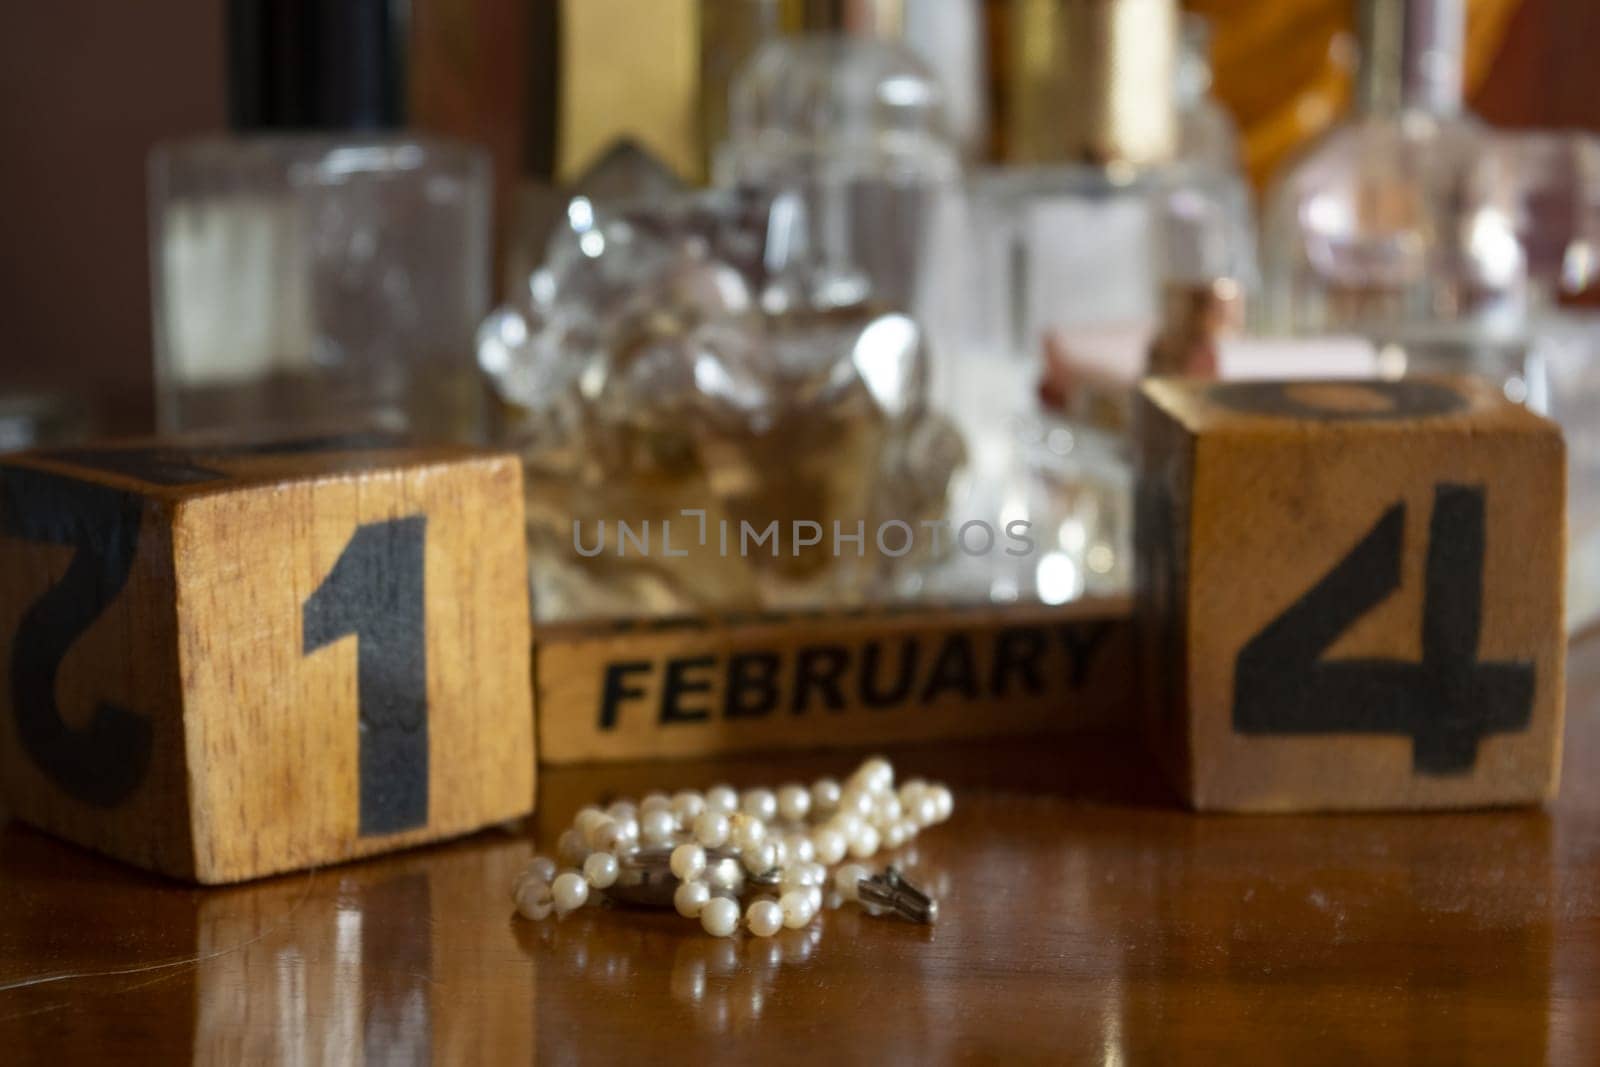 Valentine's Day represented through wooden cubes among perfume bottles